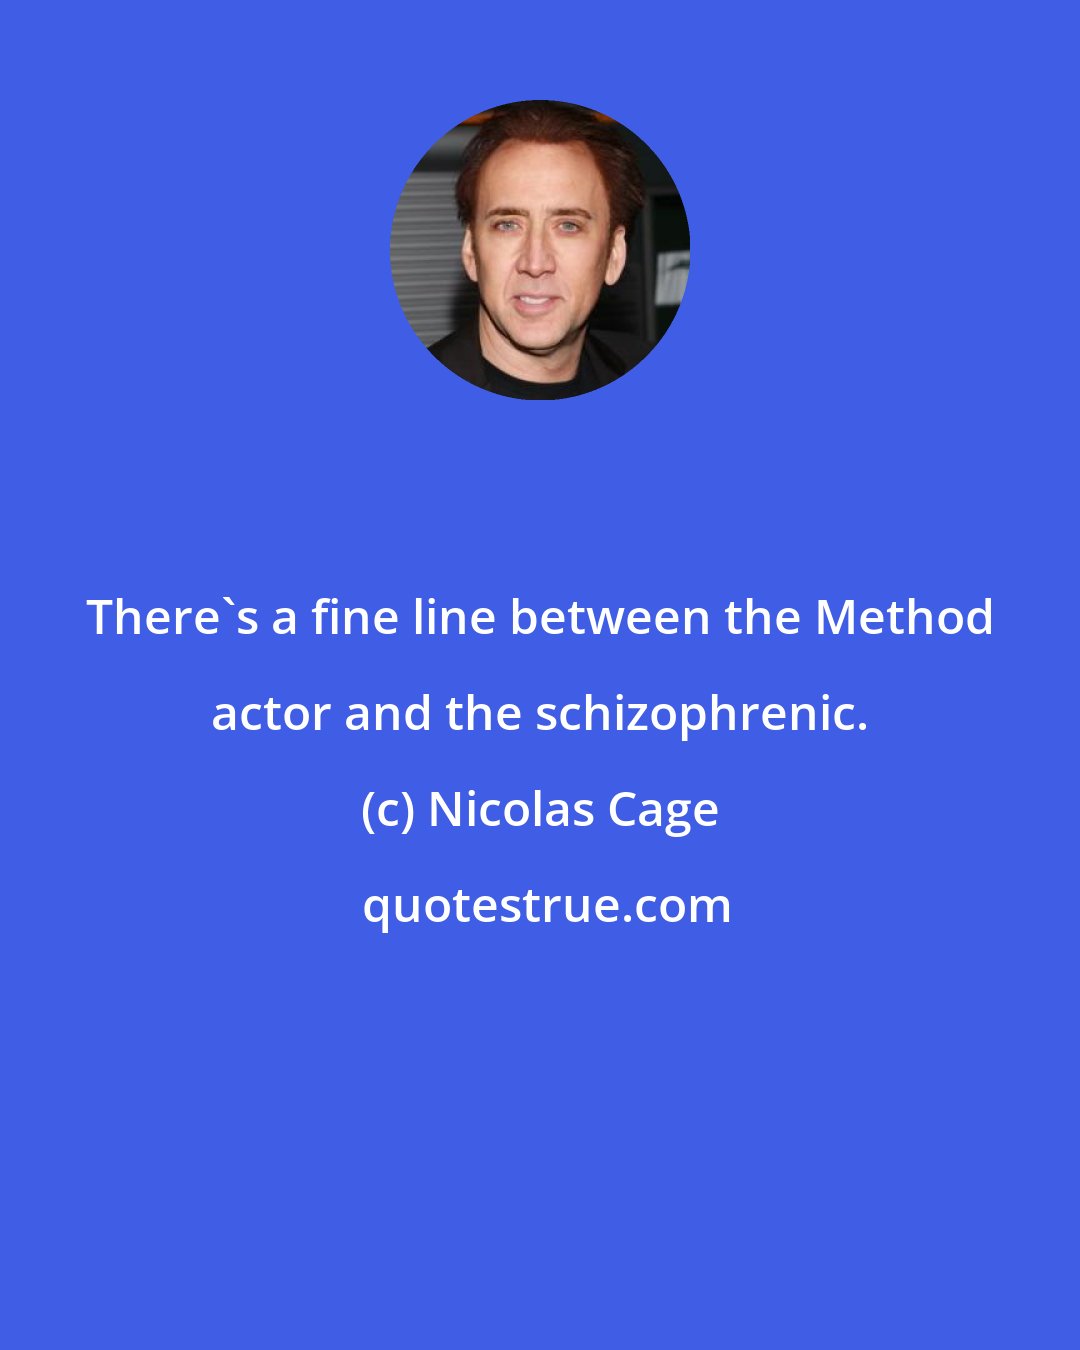 Nicolas Cage: There's a fine line between the Method actor and the schizophrenic.